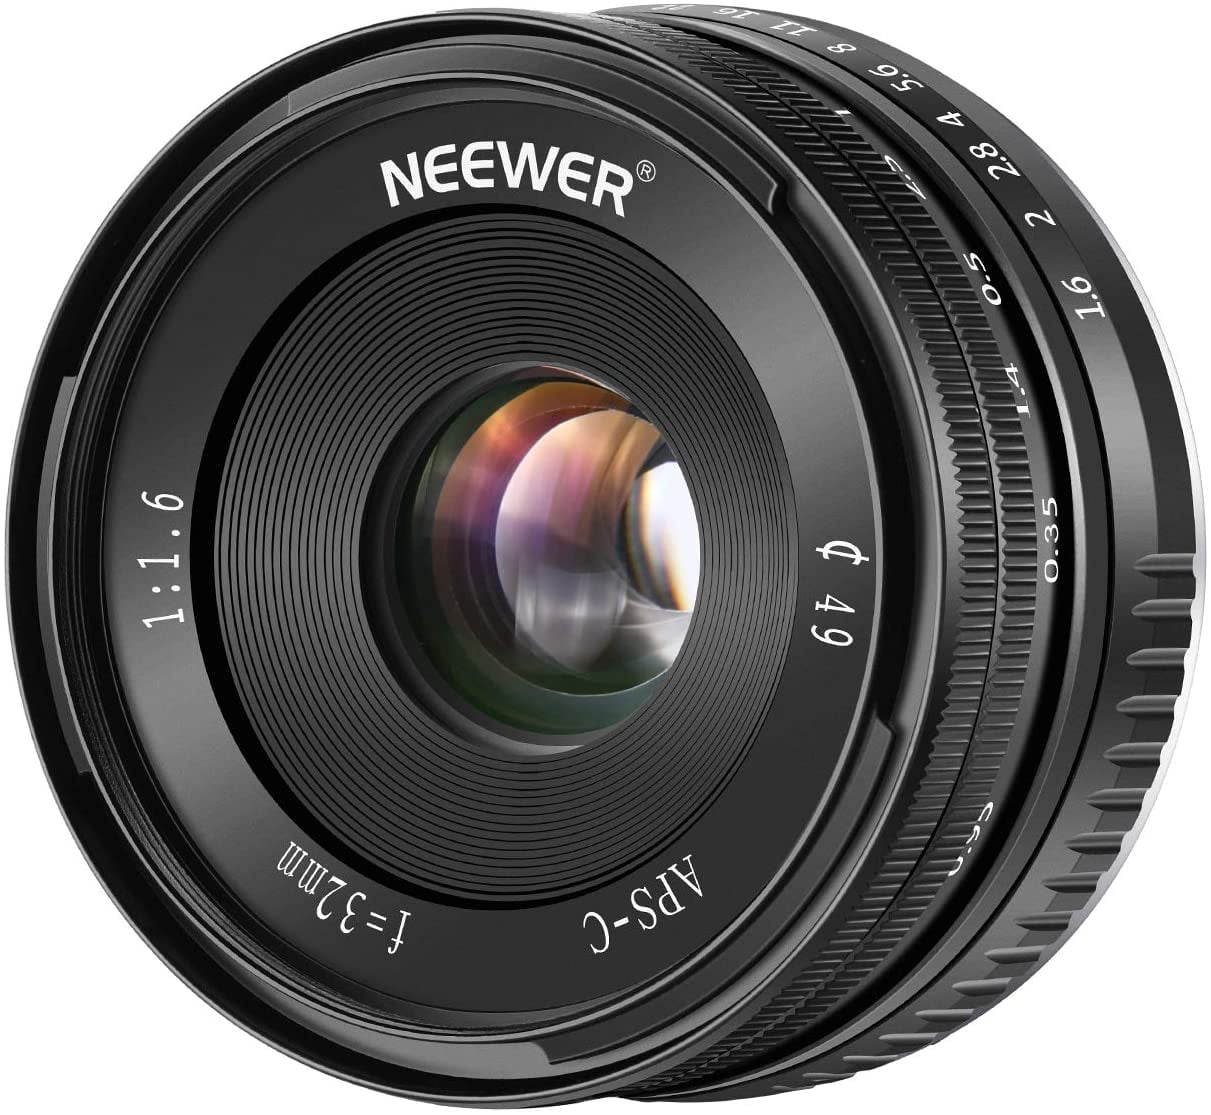 X-T1 X-T2 X-Pro1 X-Pro2 X-M1 X-T10 X-A1 X-A2 X-A3 X-E1 X-E2 X-E3 Neewer 32mm F/1.6 Manual Focus Prime Fixed Lens Large Aperture Wide Angle Lens Compatible with Fujifilm APS-C Frame Mirrorless Camera 